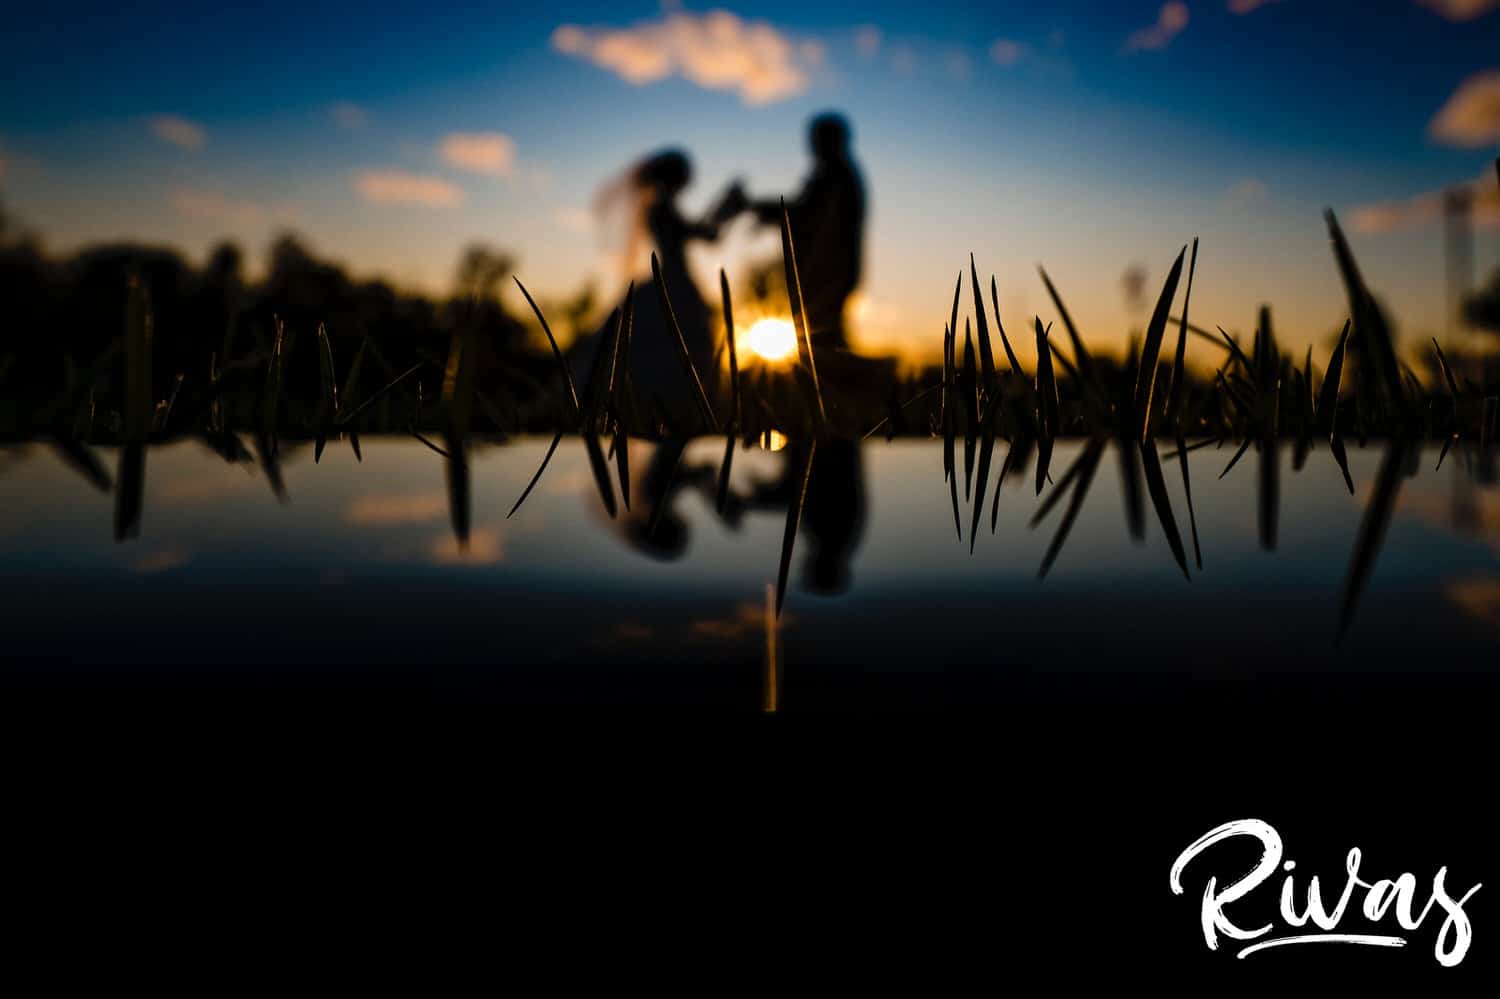 A silhouette of a bride and groom holding hands as the bride's veil blows in the air at sunset, with their reflection visible in the botttom of the frame during their fall wedding day at Piazza Messina in Cottleville, MO.